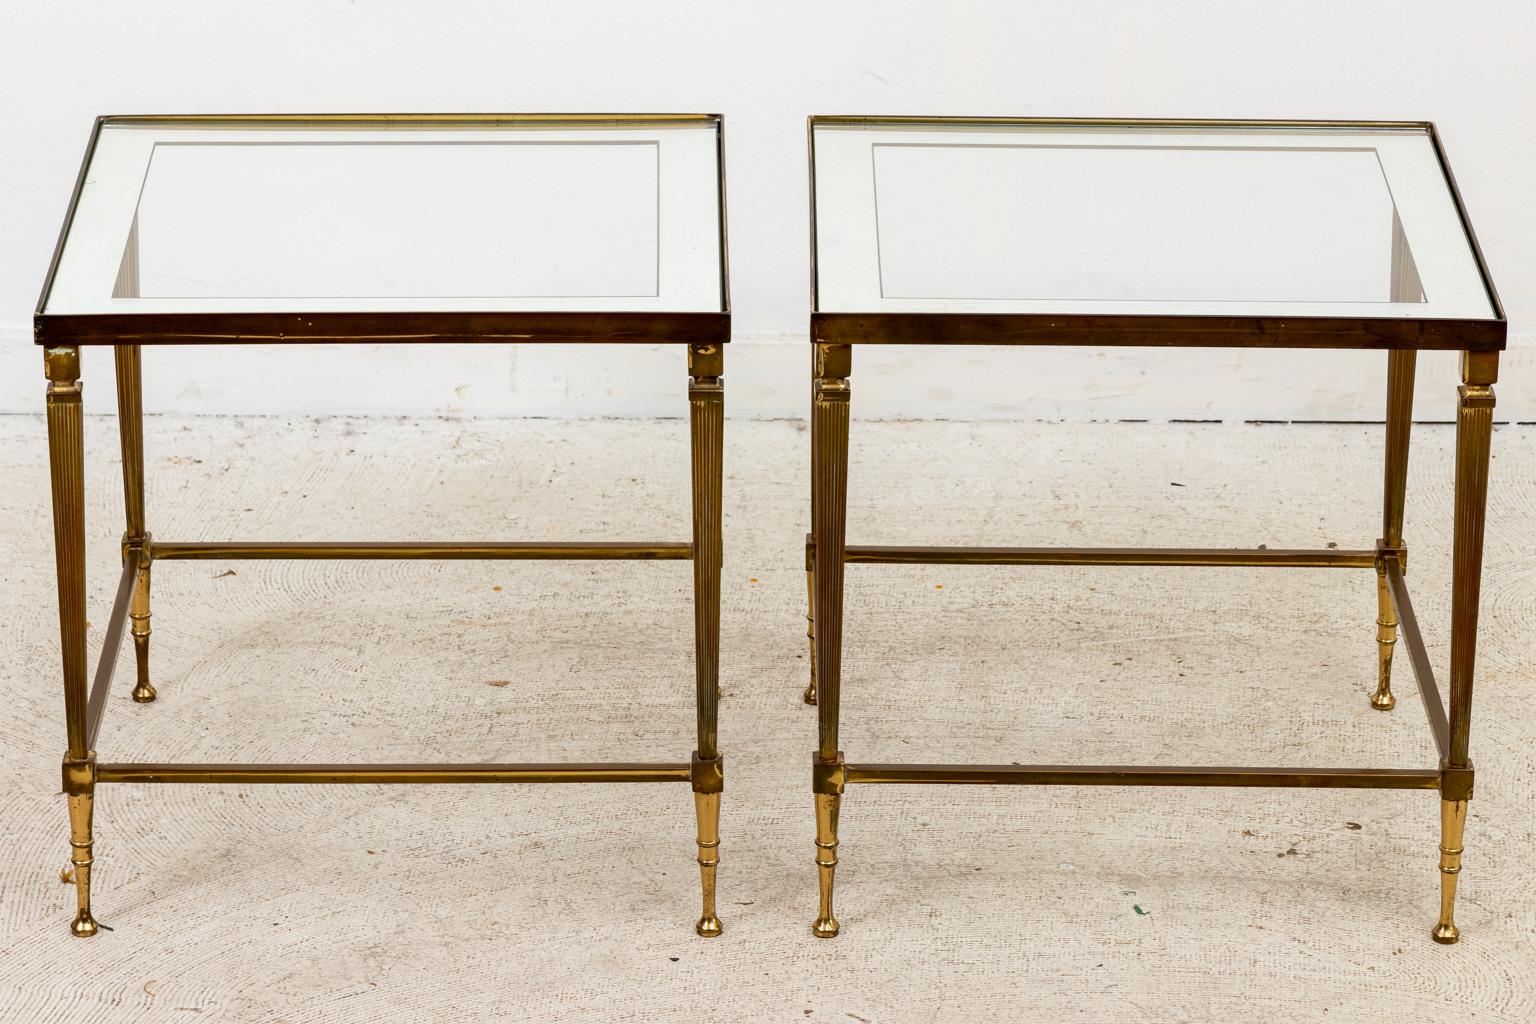 Circa 1980s Maison Jansen style brass cocktail table with a pair of nesting tables underneath. The tables feature a glass top with mirrored, etched band. Please note of wear consistent with age.